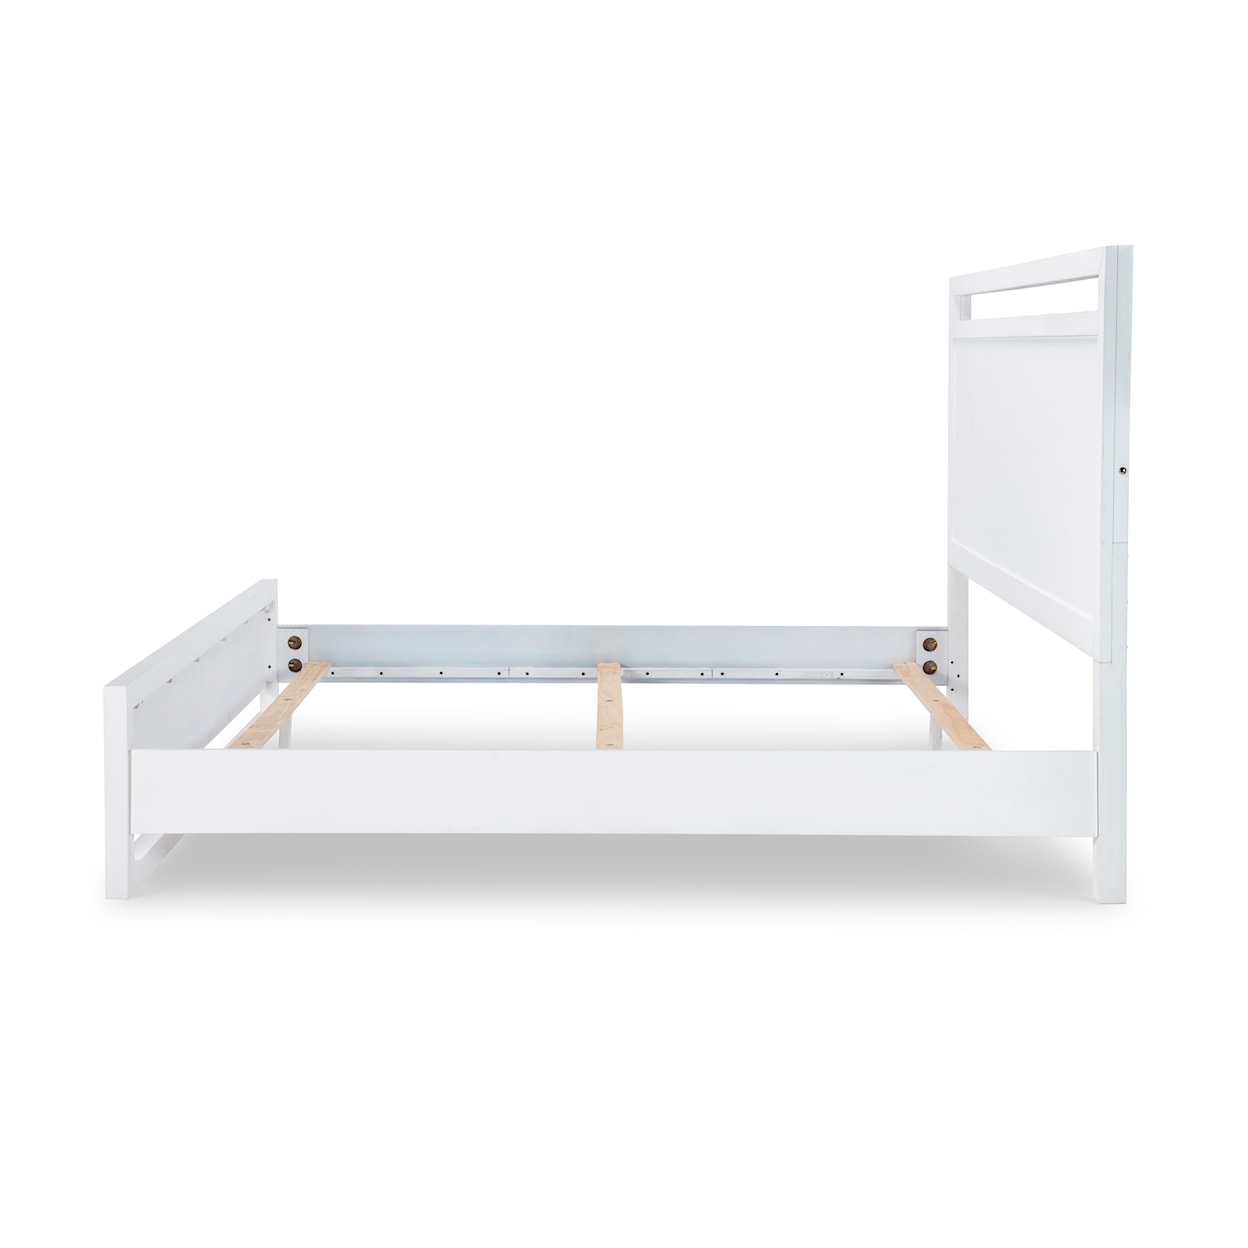 Legacy Classic Summerland King Panel Bed